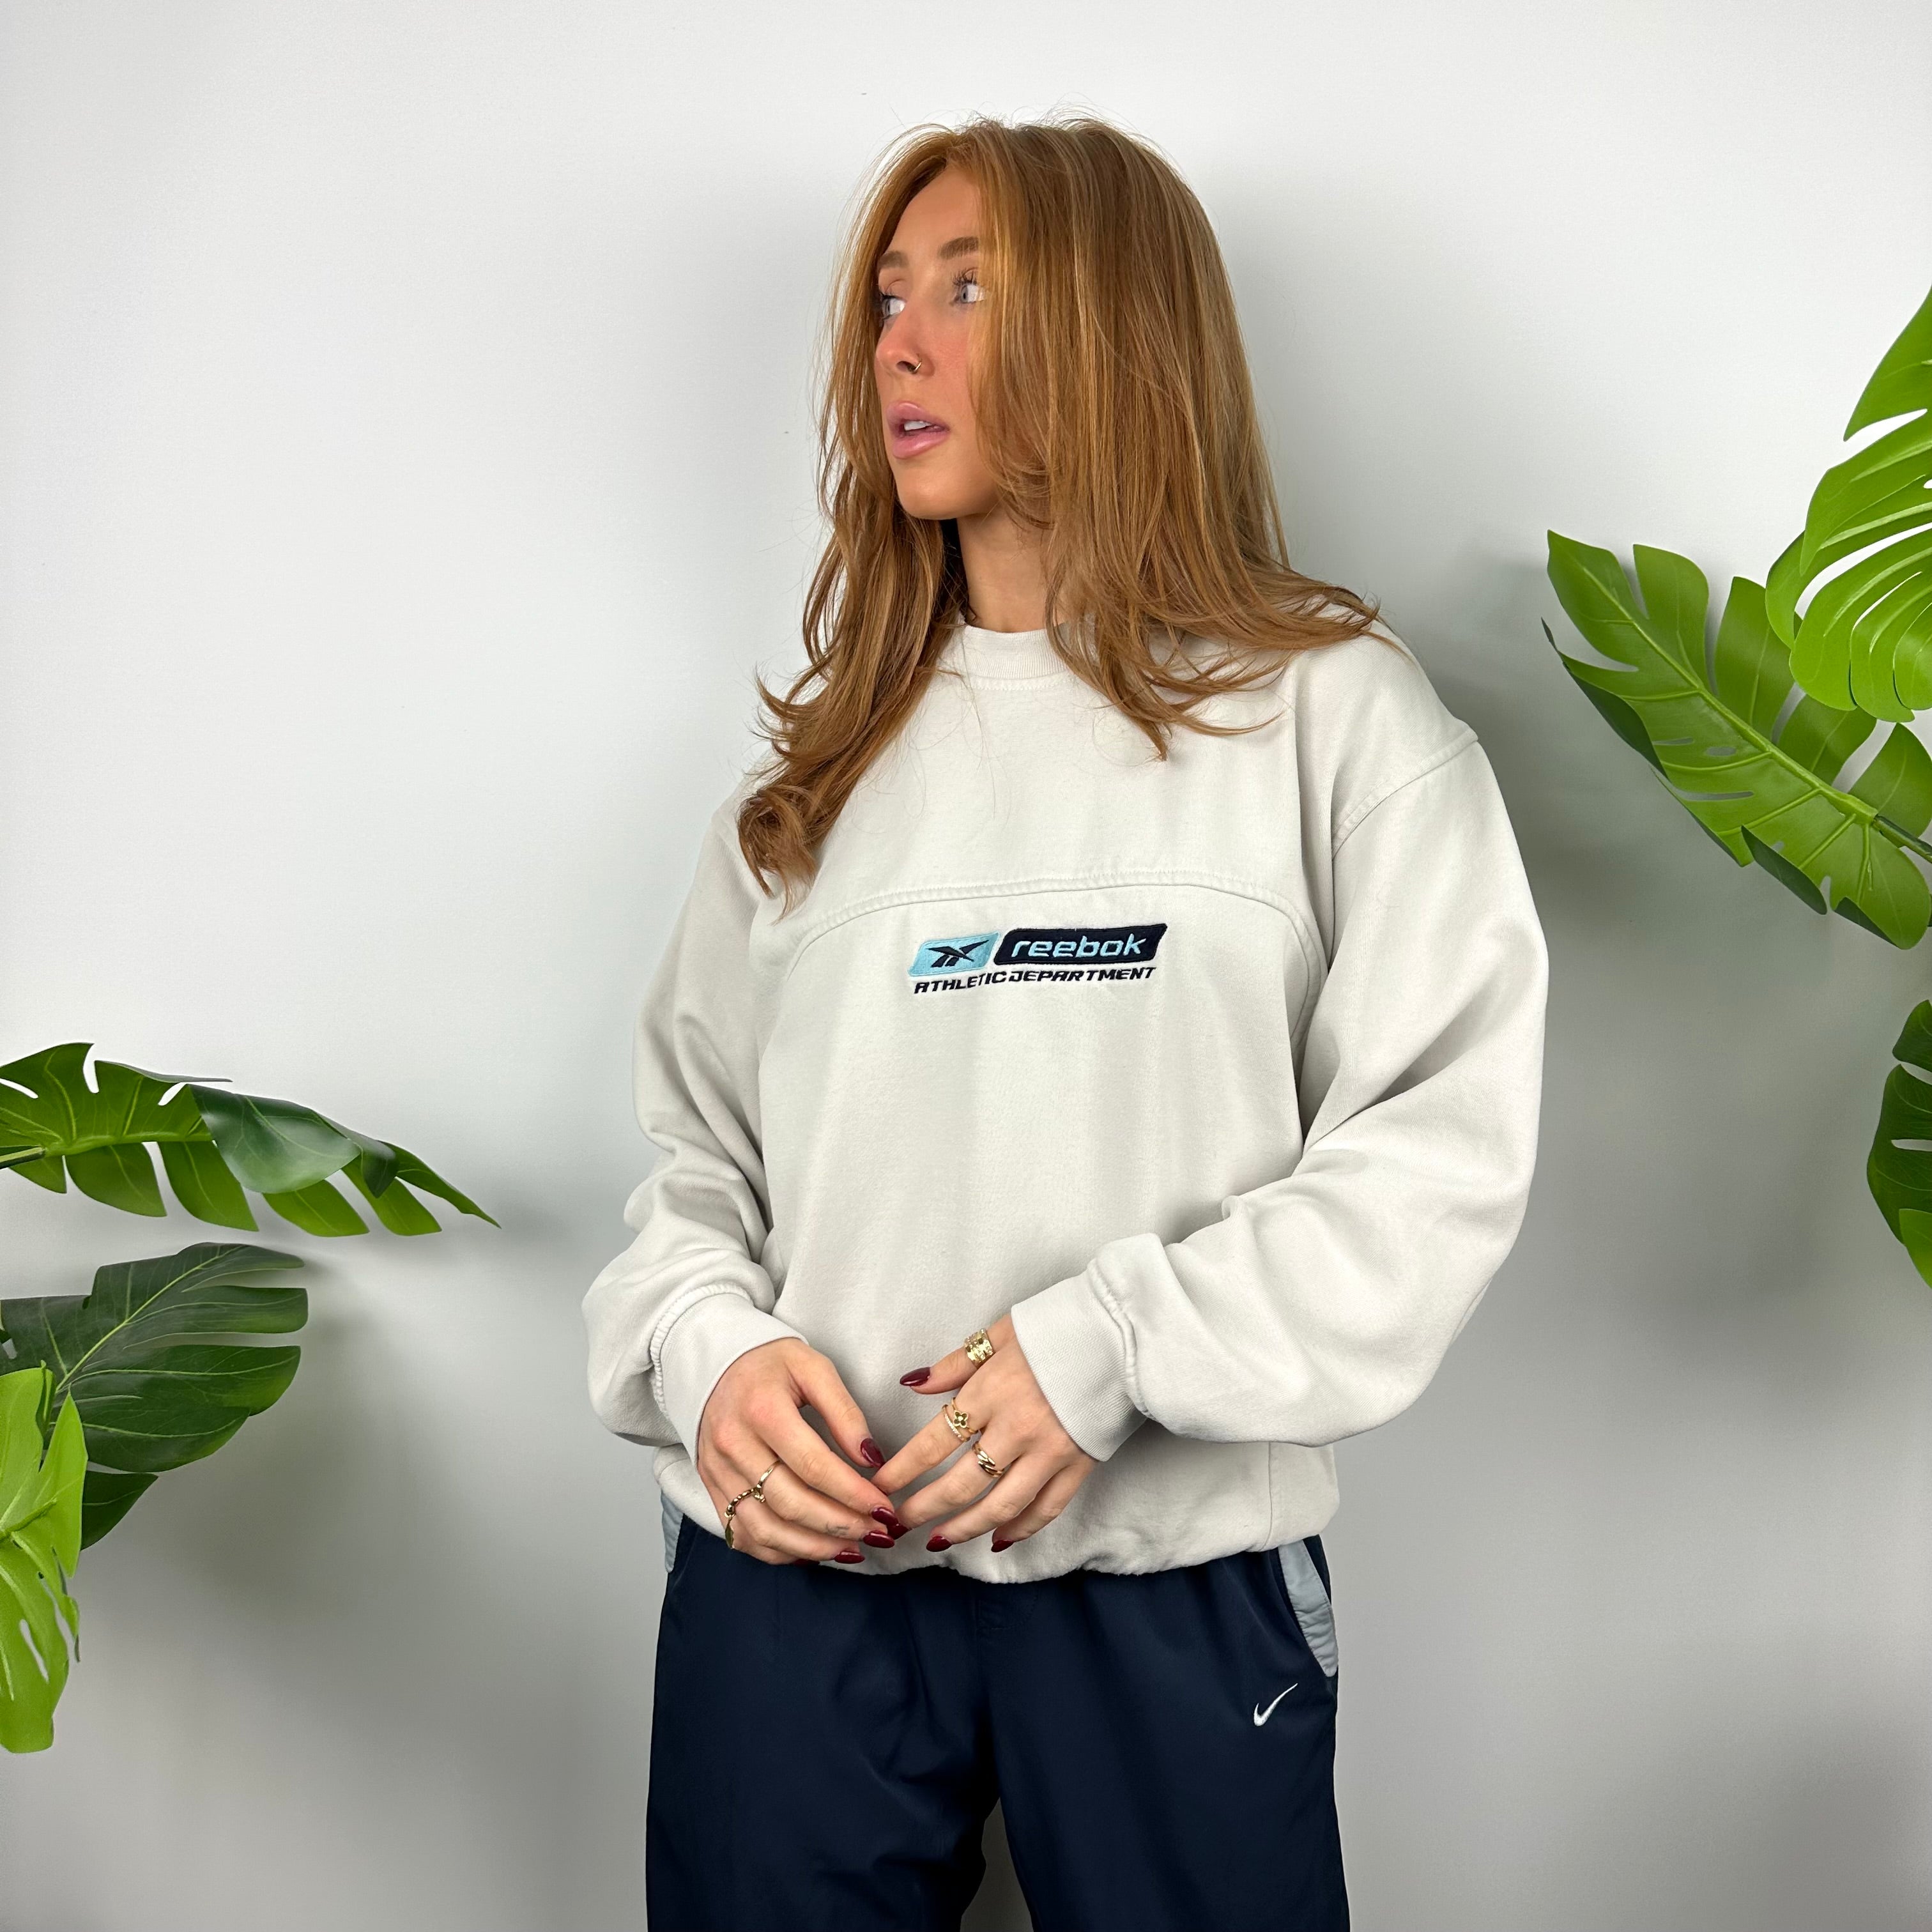 Reebok White Embroidered Spell Out Sweatshirt (M)